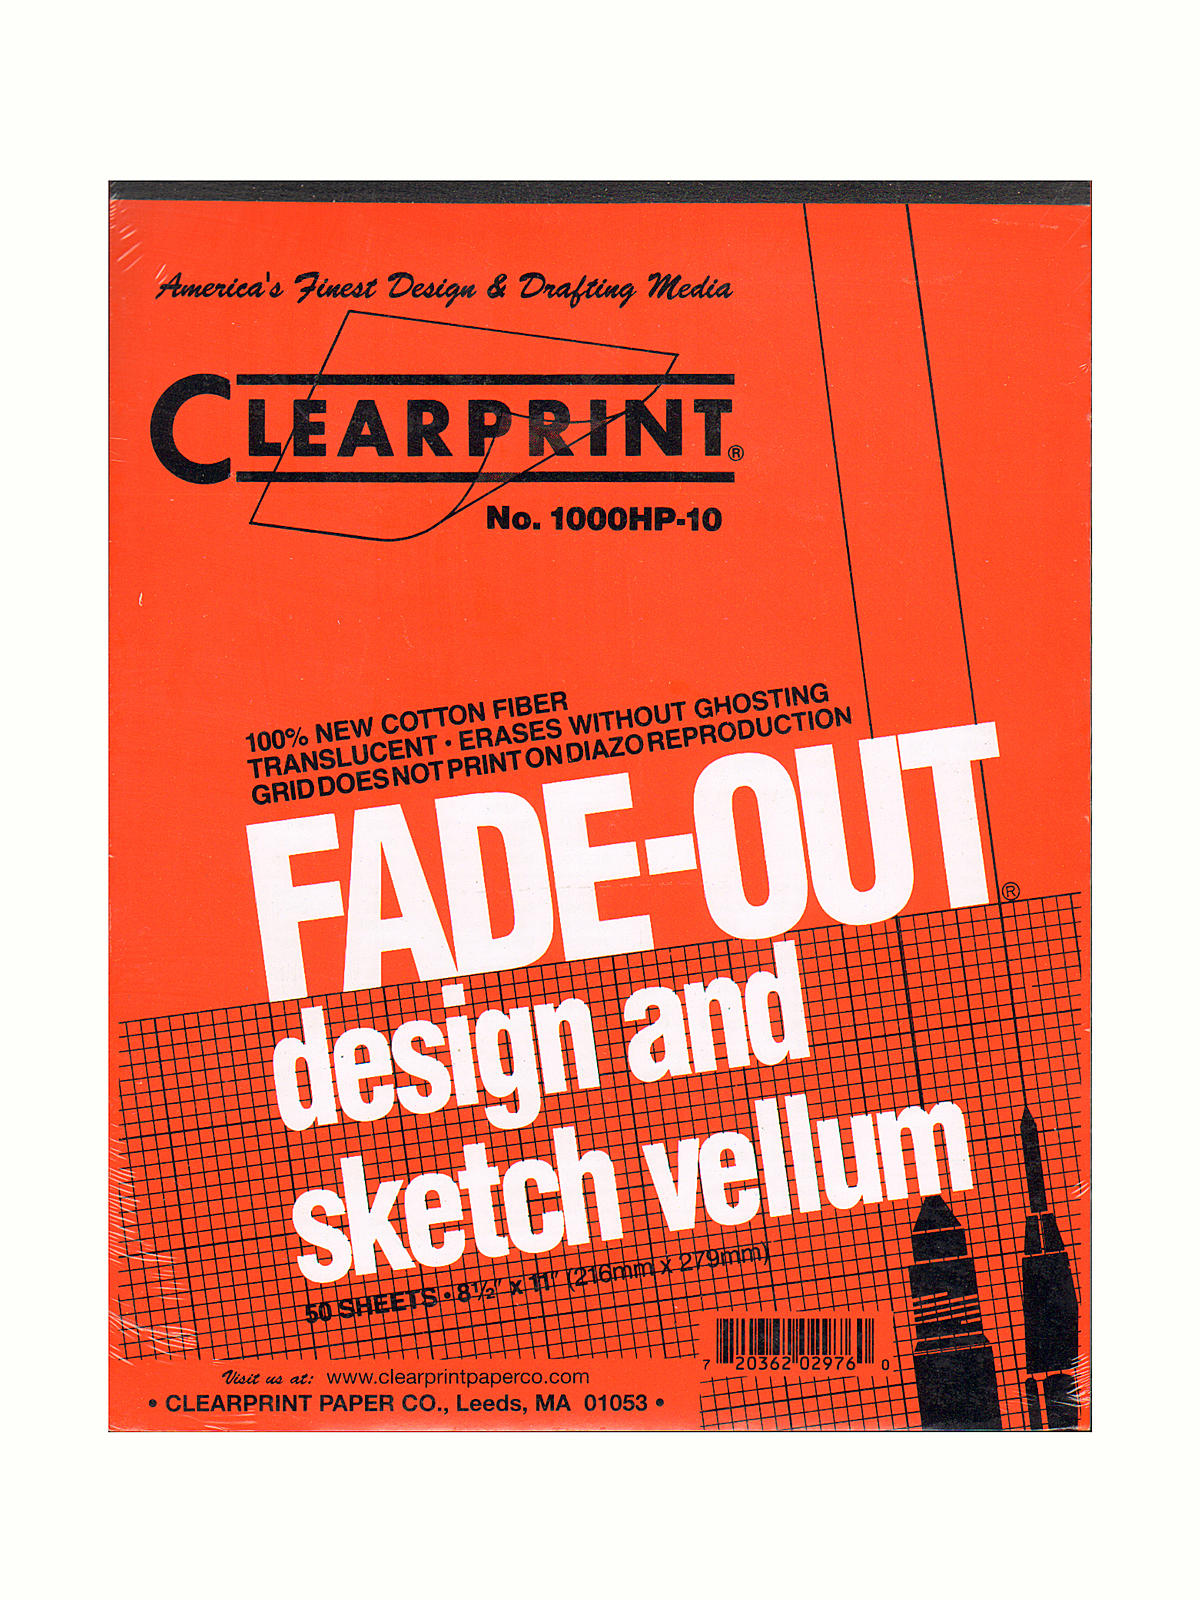 Fade-out Design And Sketch Vellum - Grid Pad 10 X 10 8 1 2 In. X 11 In. Pad Of 50